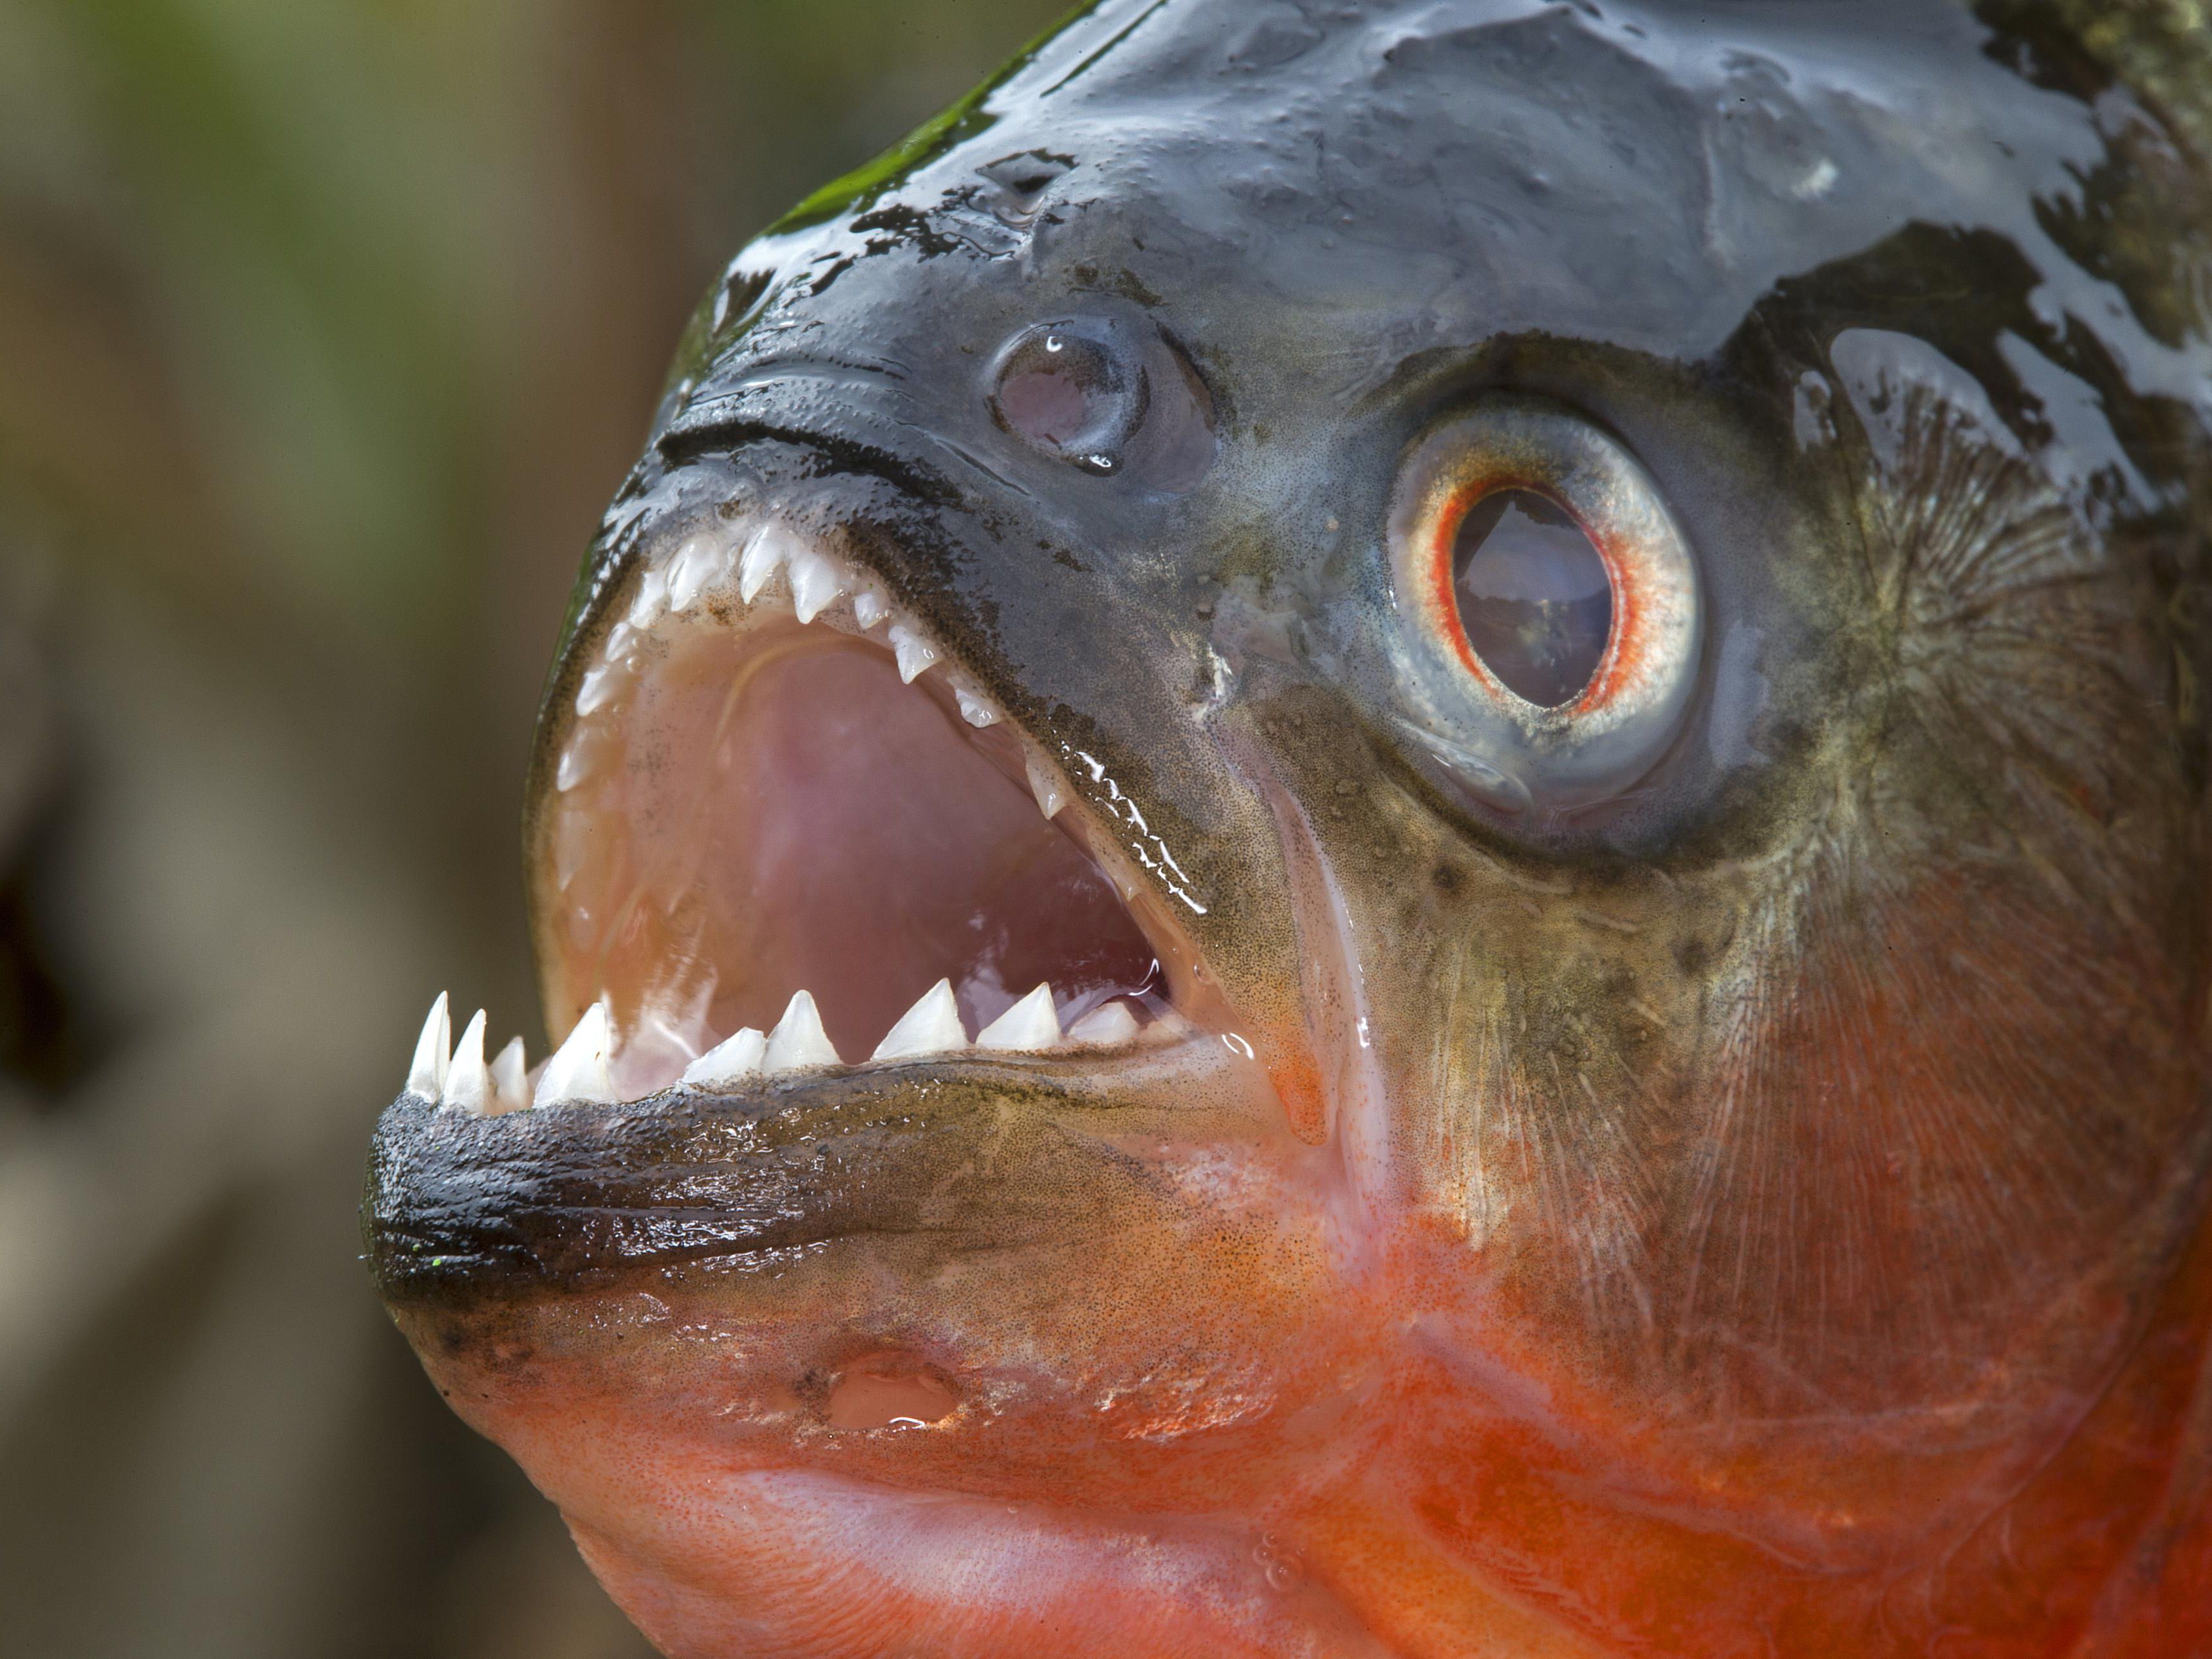 A close up shot of piranha fish with its mouth open